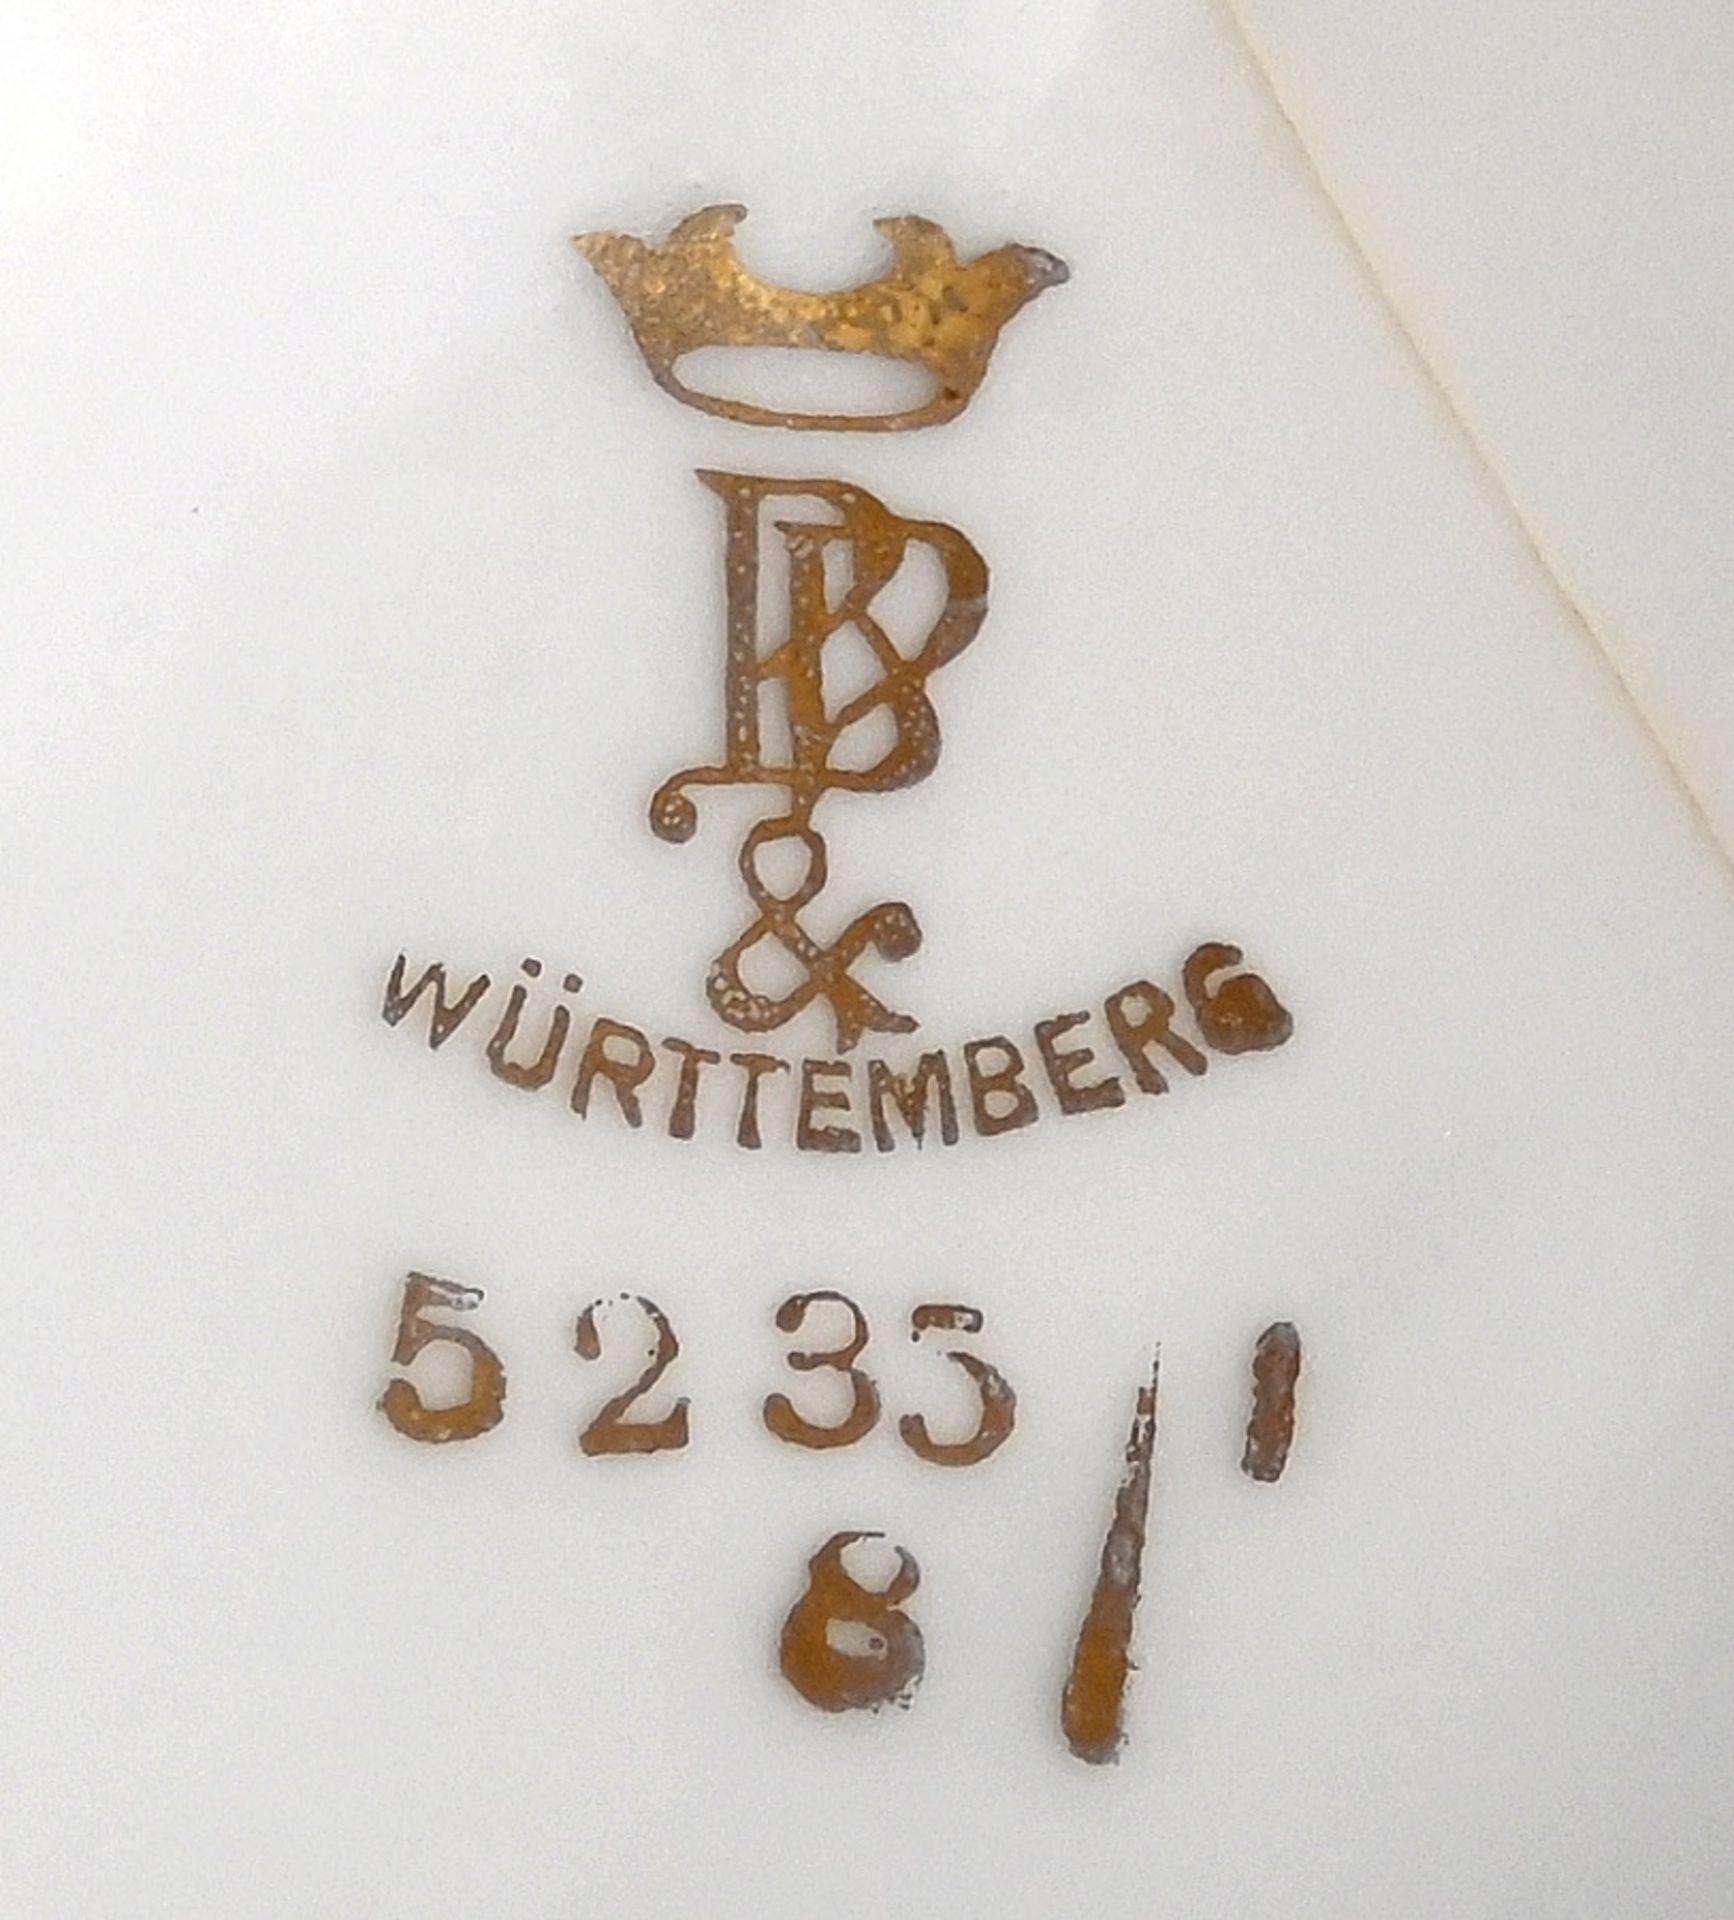 KAFFEESERVICE 8 Pers. Pfeiffer & Bauer, Württemberg - Image 3 of 3